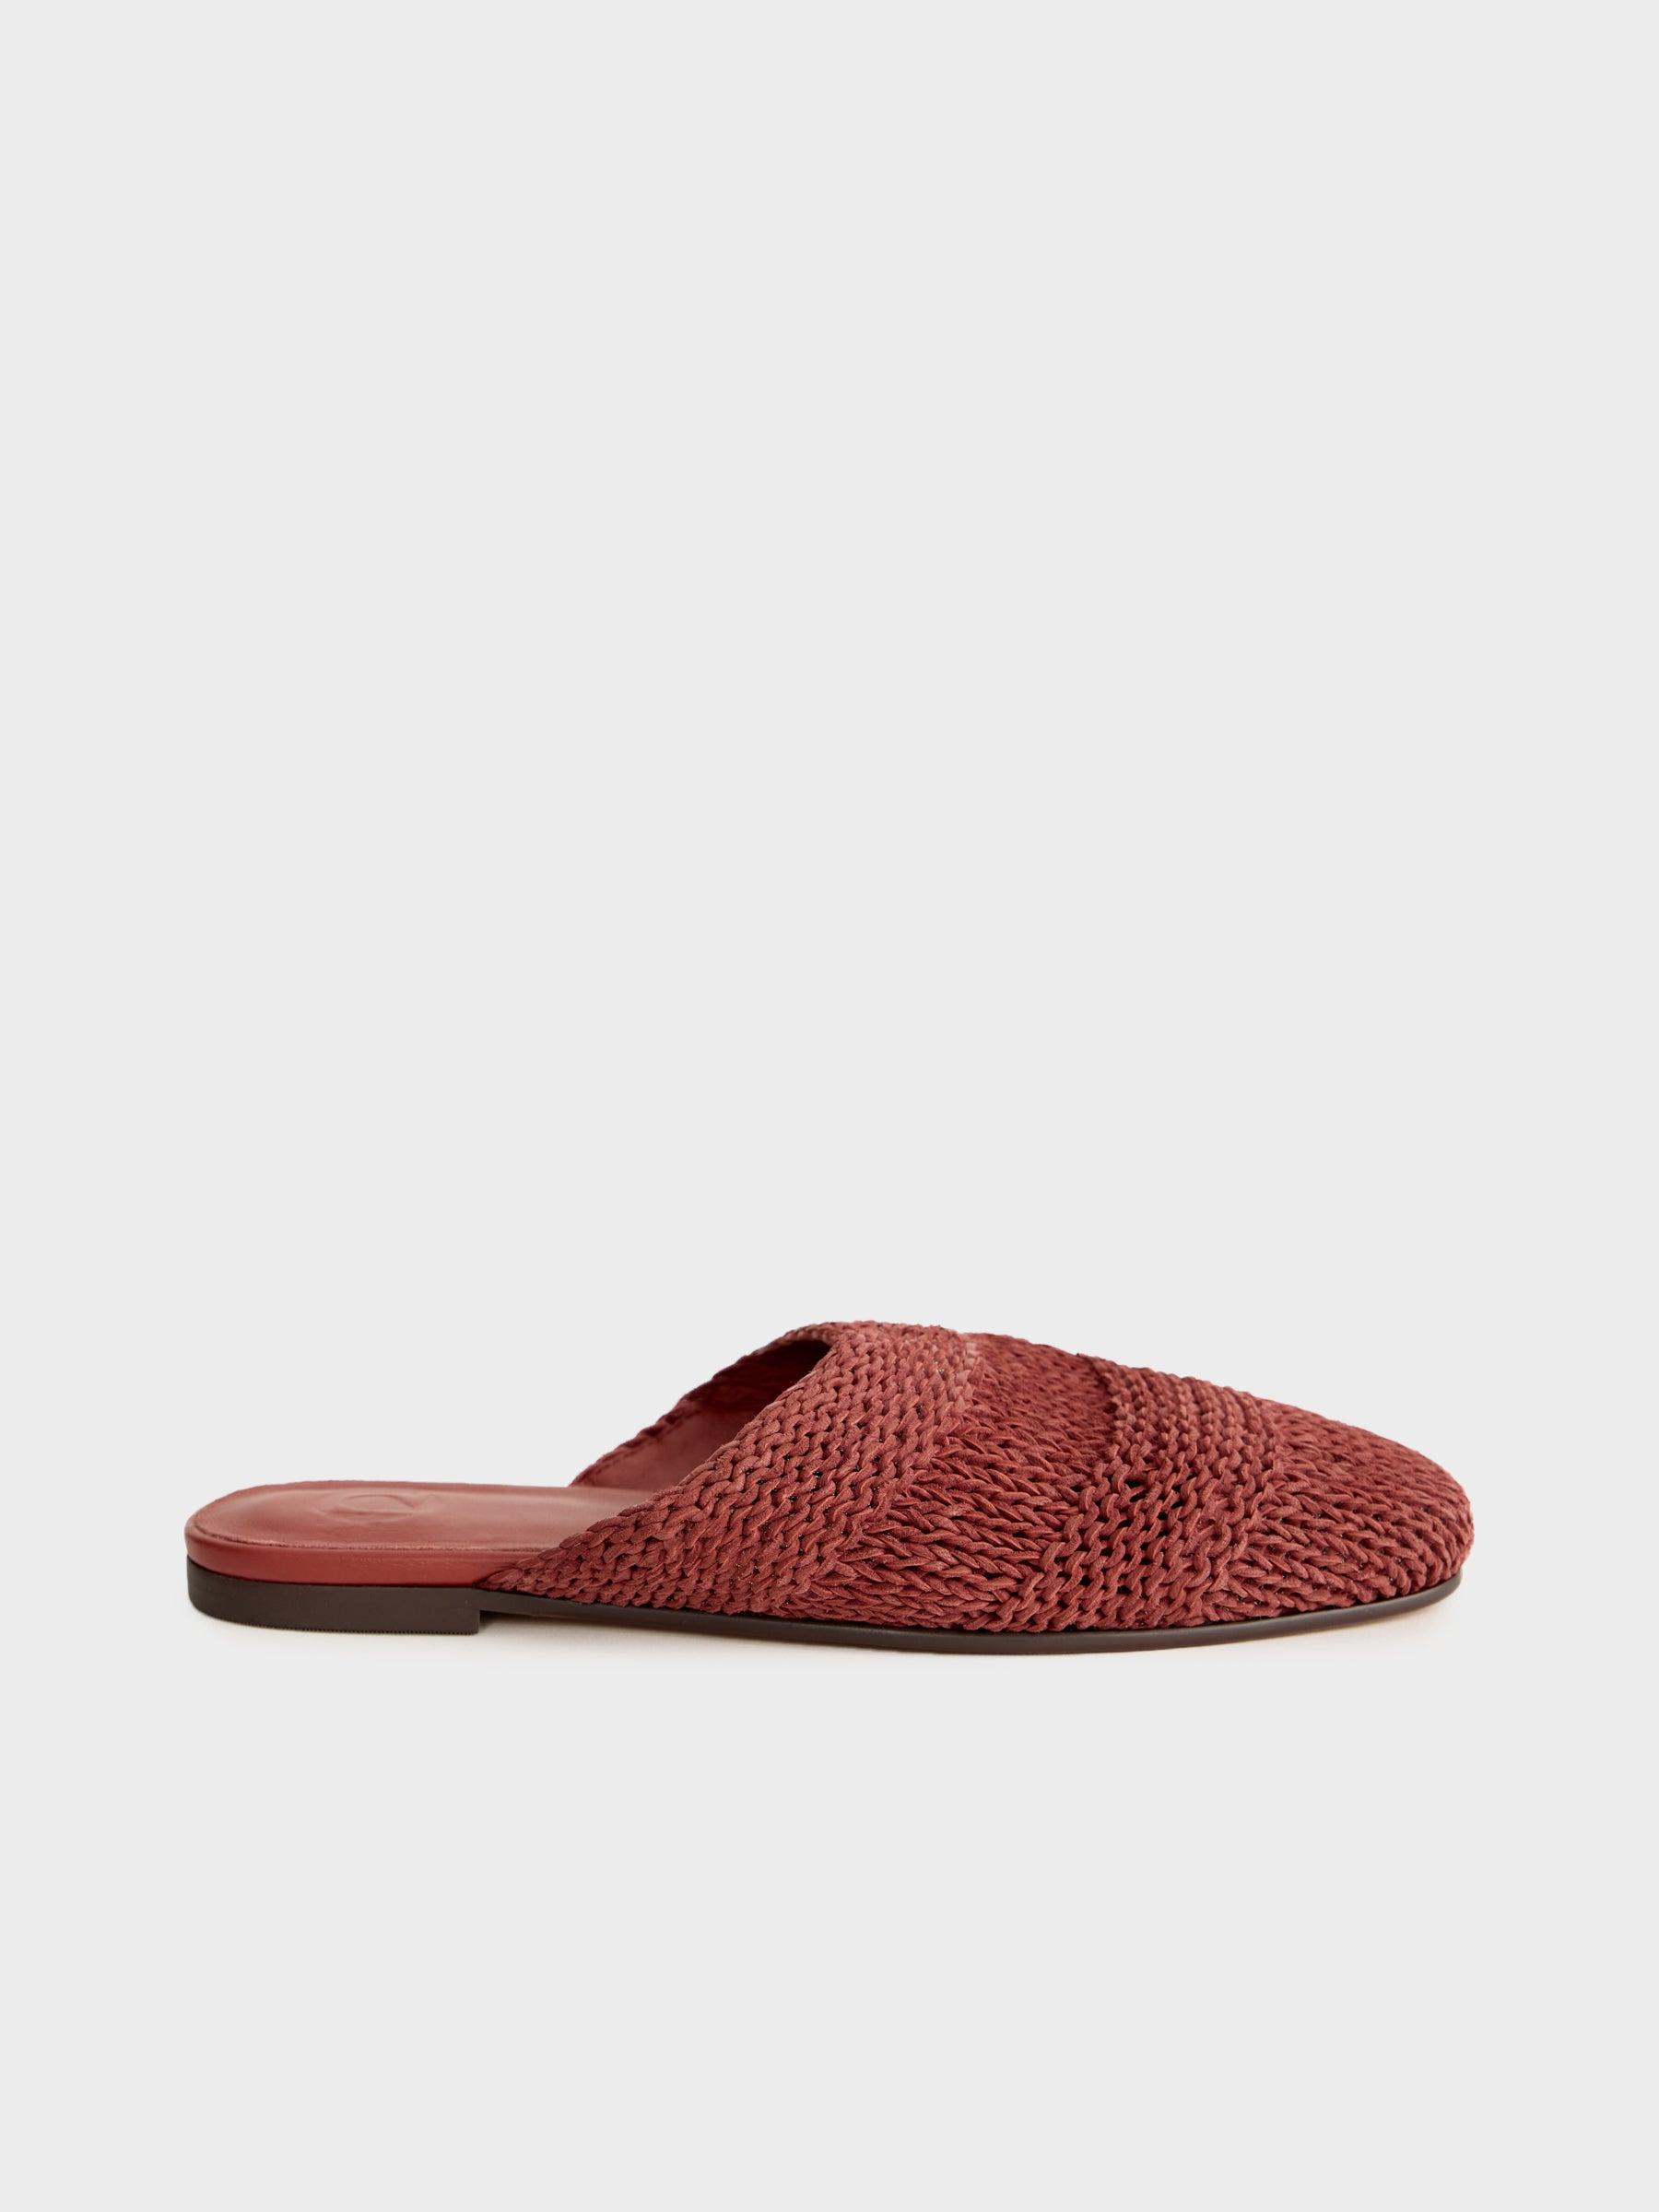 Woven leather mules